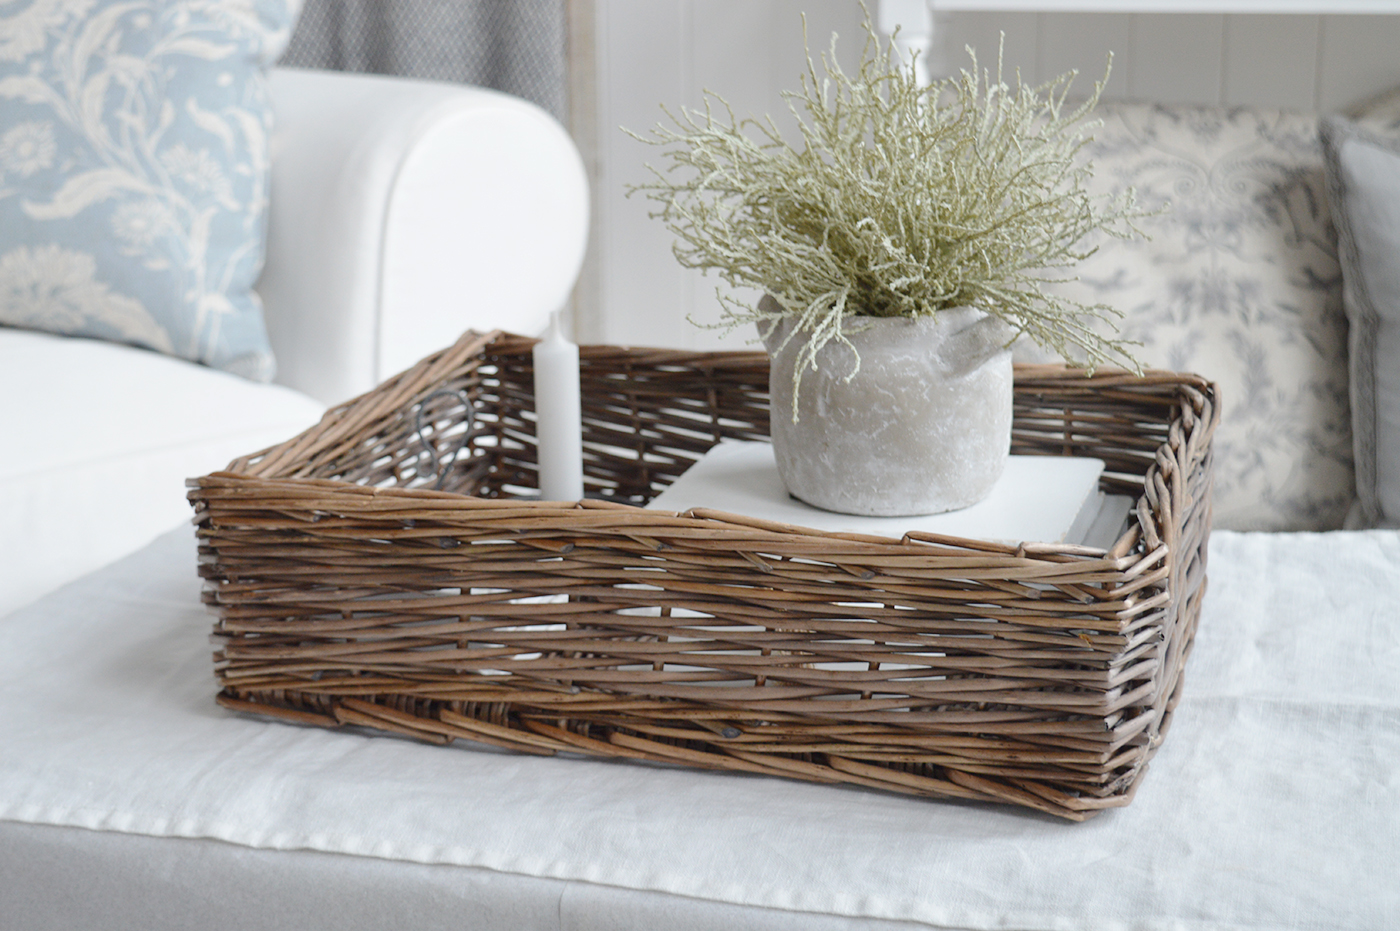 Harrow basket tray for coffee table styling in New England style modern farmhouse, country and coastal interiors